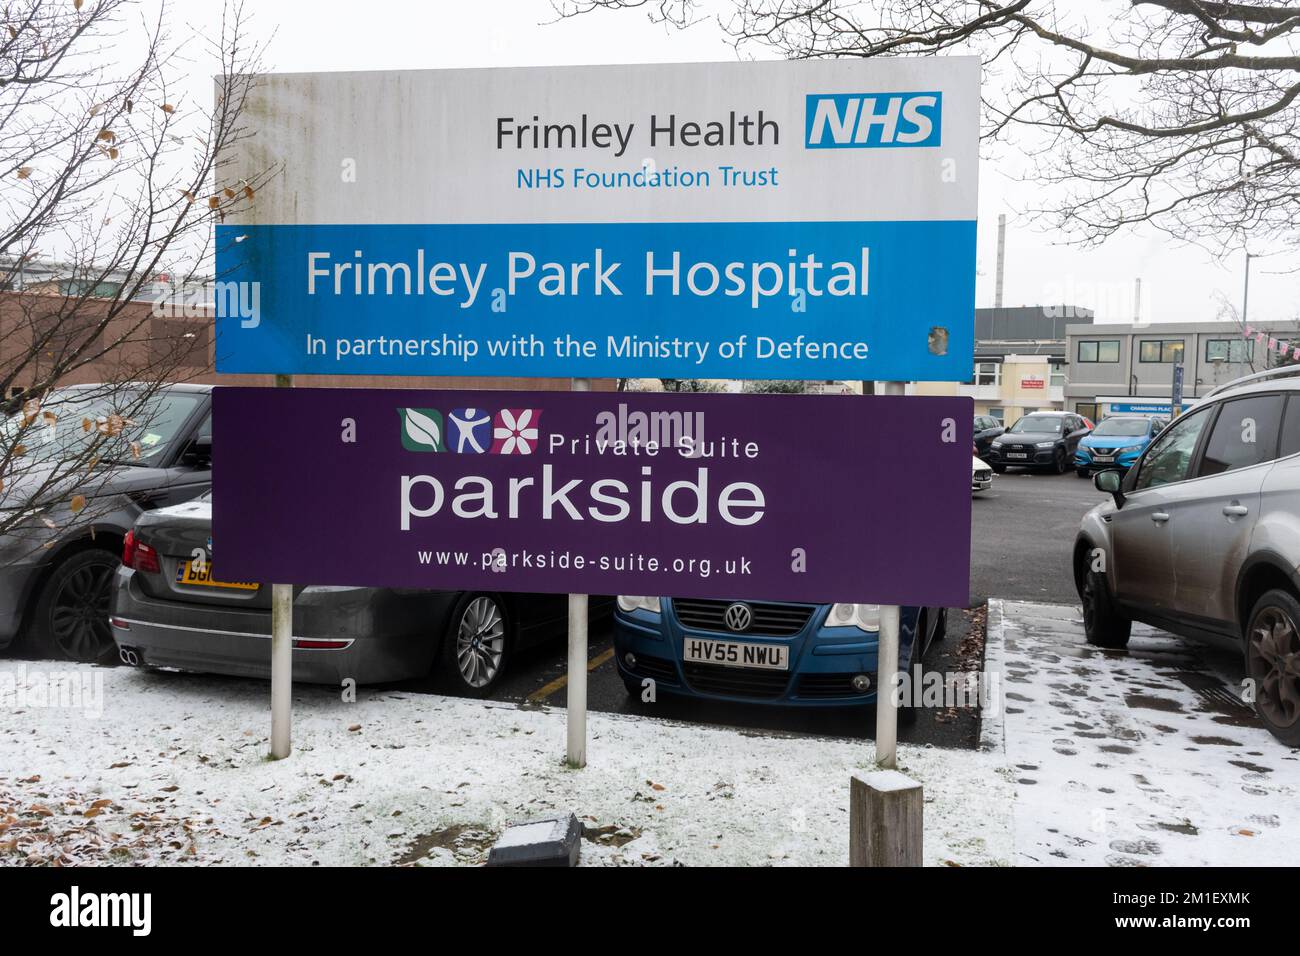 December 12th, 2022. Frimley Park Hospital in winter with snow, Surrey, England, UK. The NHS is struggling this winter with staff shortages, huge pressure on hospital beds, and the upcoming nurses strikes which are due to start this week. There is a huge backlog of patients waiting for operations and treatment, and high numbers of winter infections such as flu, covid-19 and RSV are expected. Stock Photo